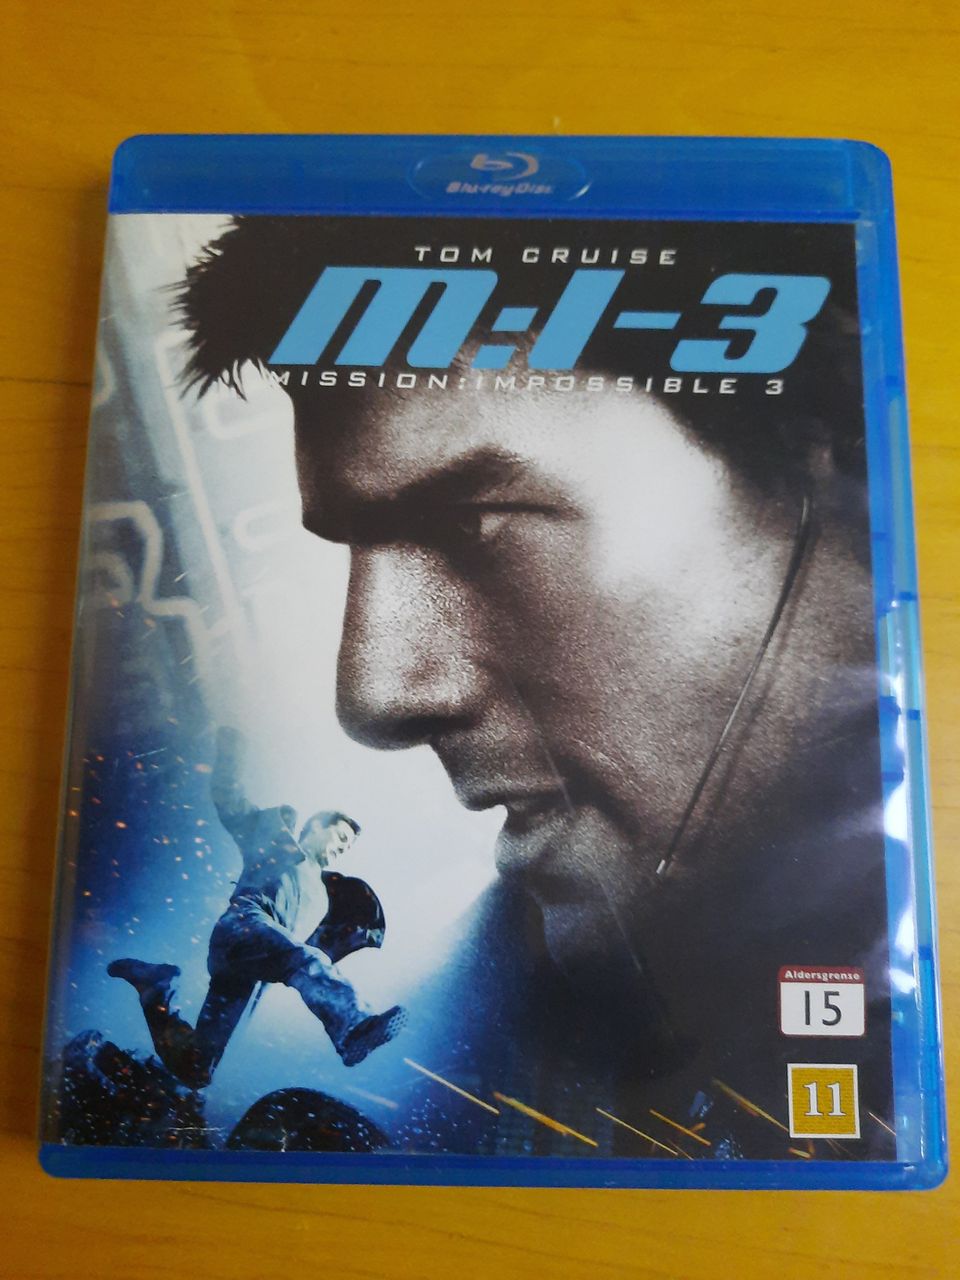 Mission imdossible 3, blue ray